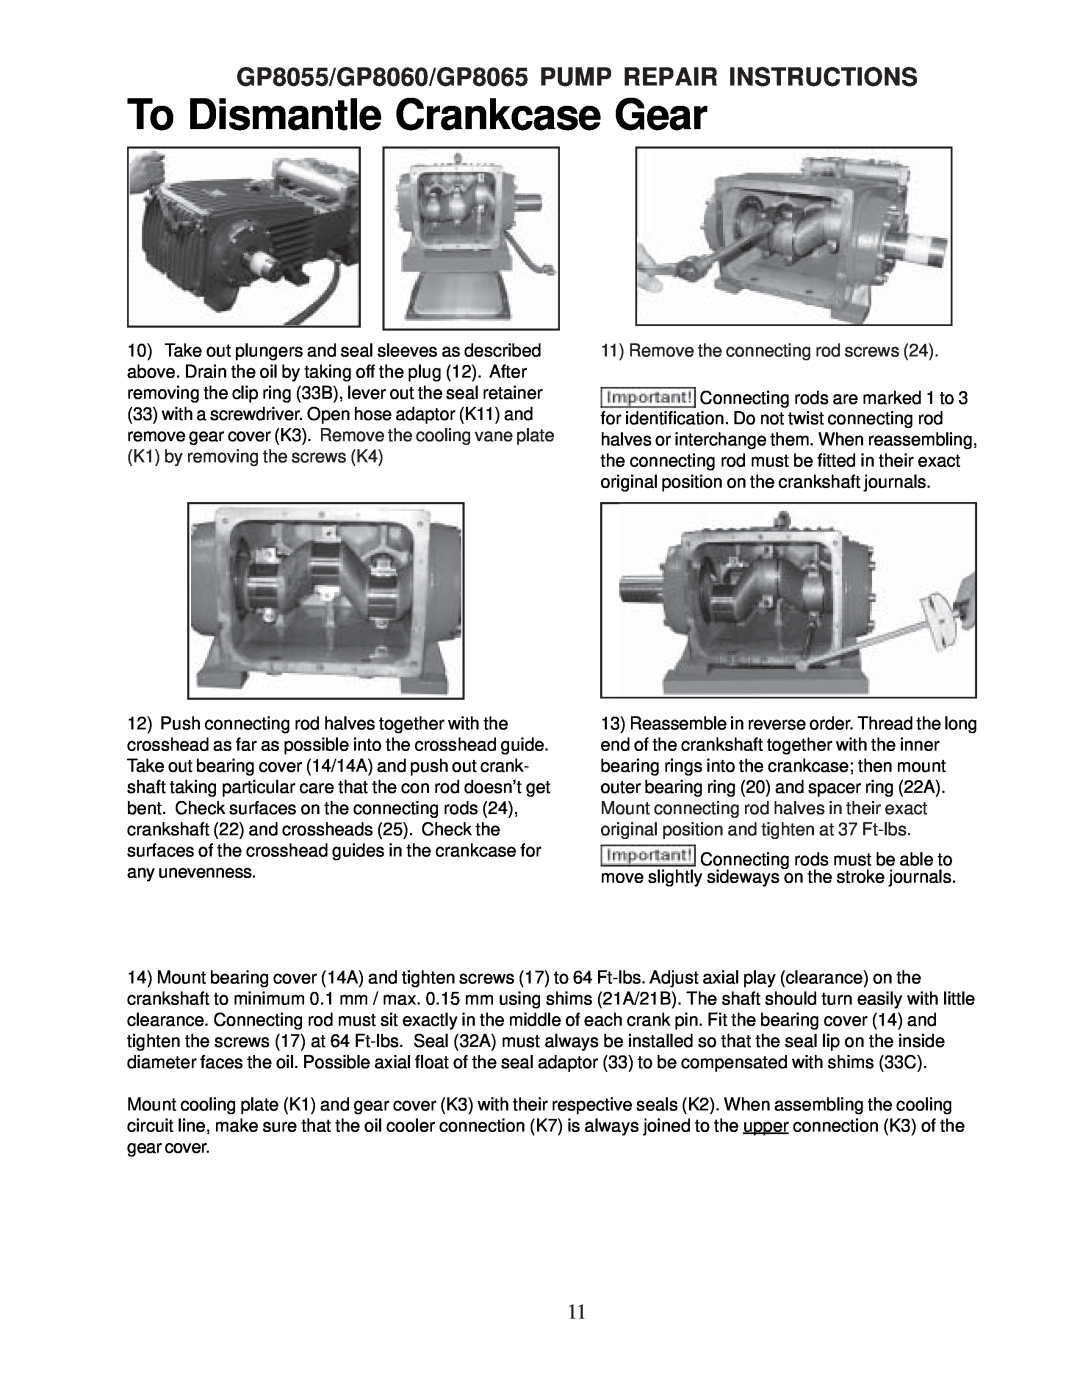 Giant To Dismantle Crankcase Gear, GP8055/GP8060/GP8065 PUMP REPAIR INSTRUCTIONS, Remove the connecting rod screws 